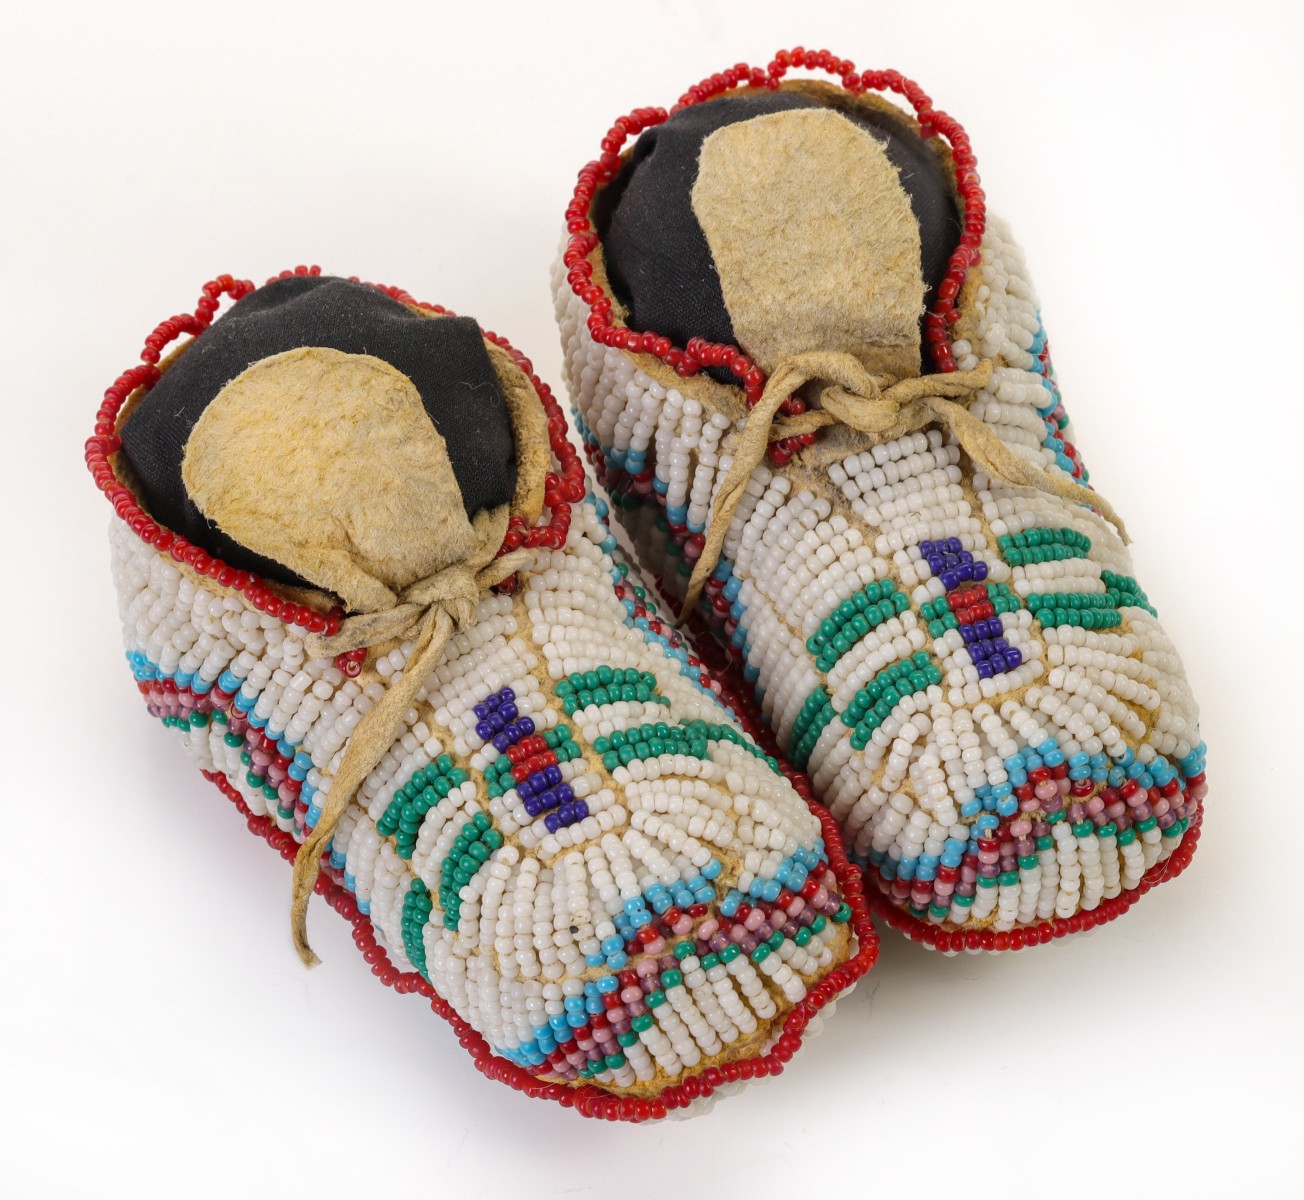 PLAINS CHILD MOCCASIN PAIR WITH BEADED SOLES C. 1920